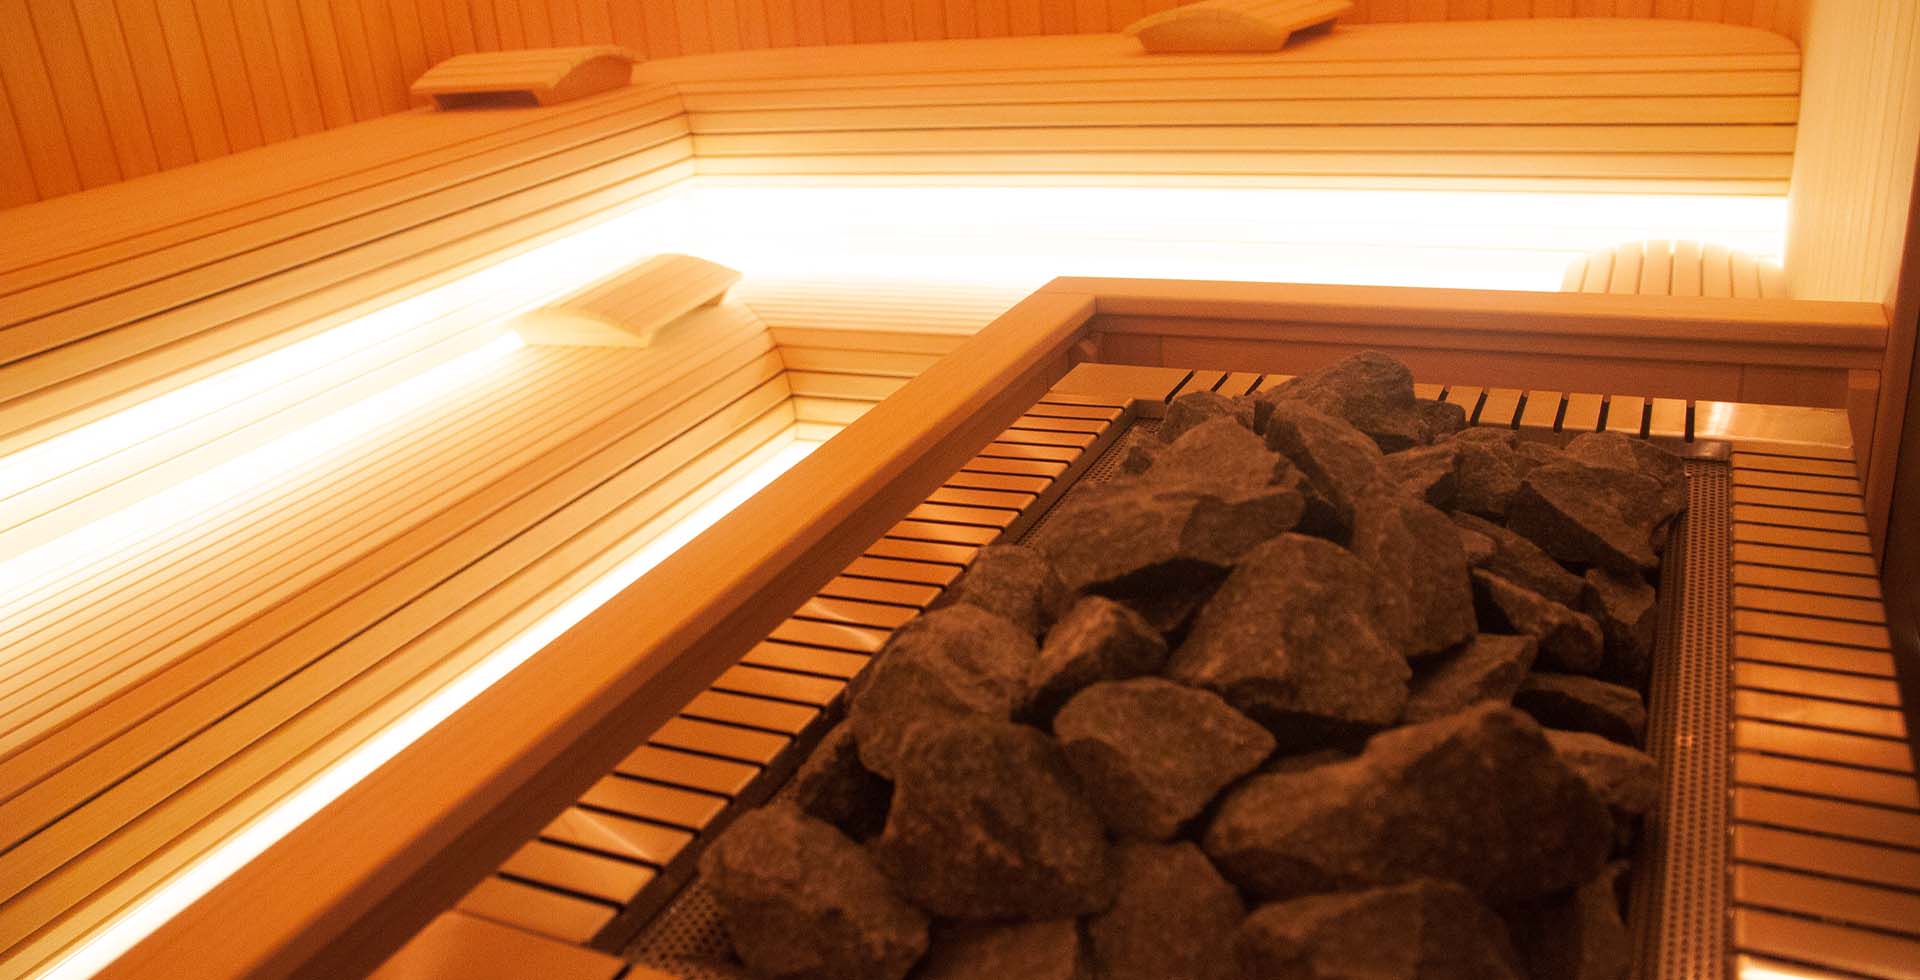 Step into opulence with Sauna Dekor's Qatar sauna. Buy and build your retreat with a design that speaks of luxury without compromising on cost.